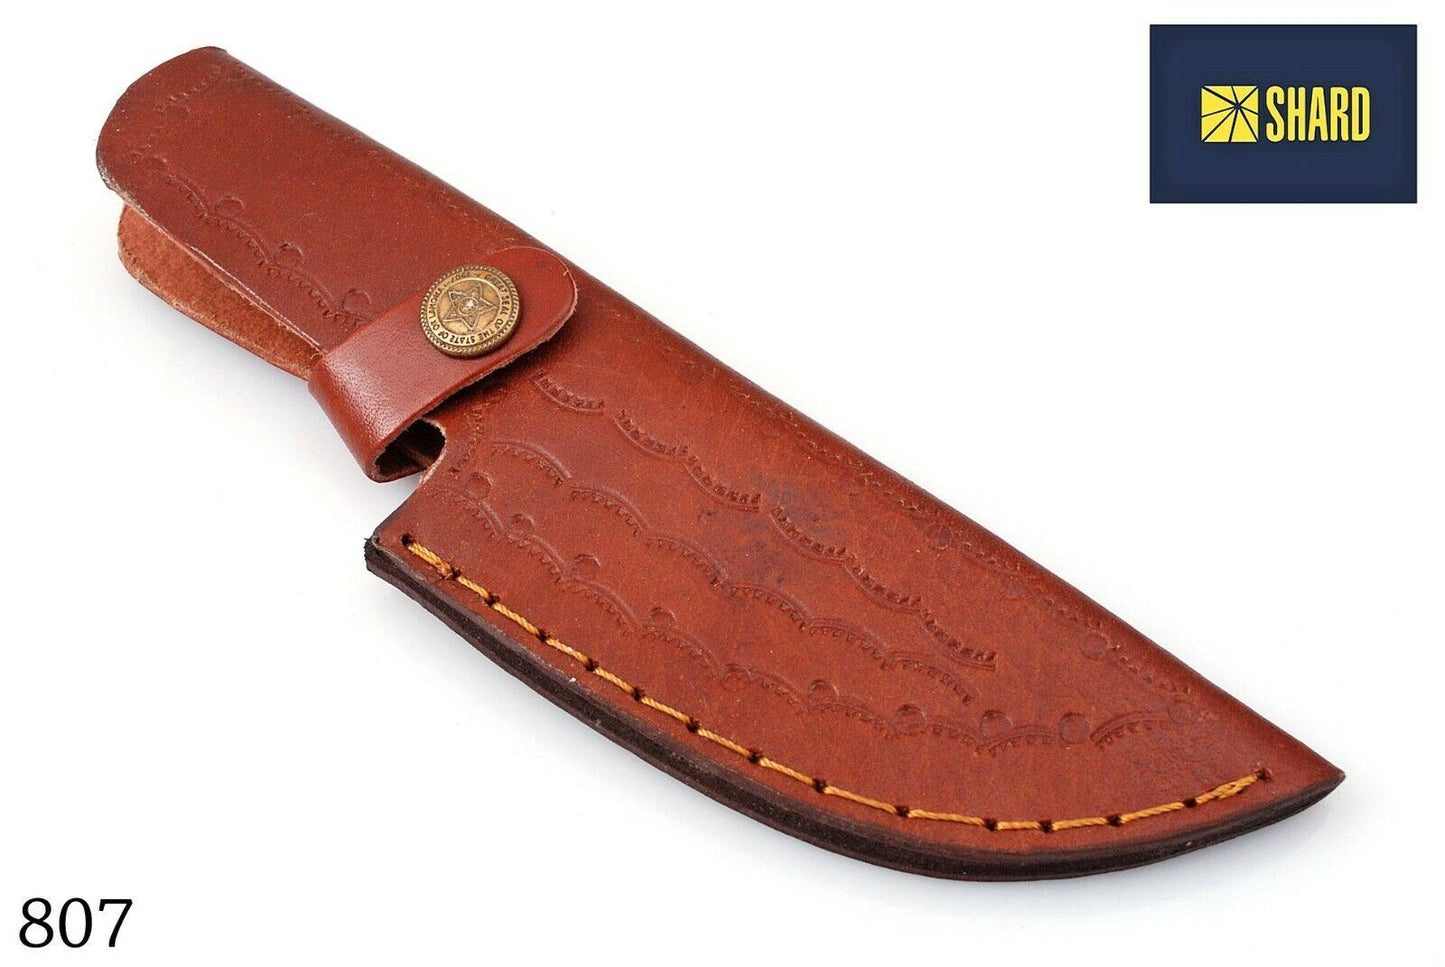 HANDMADE Genuine Hand Crafted BELT SHEATH Holster For FIXED BLADE KNIFE